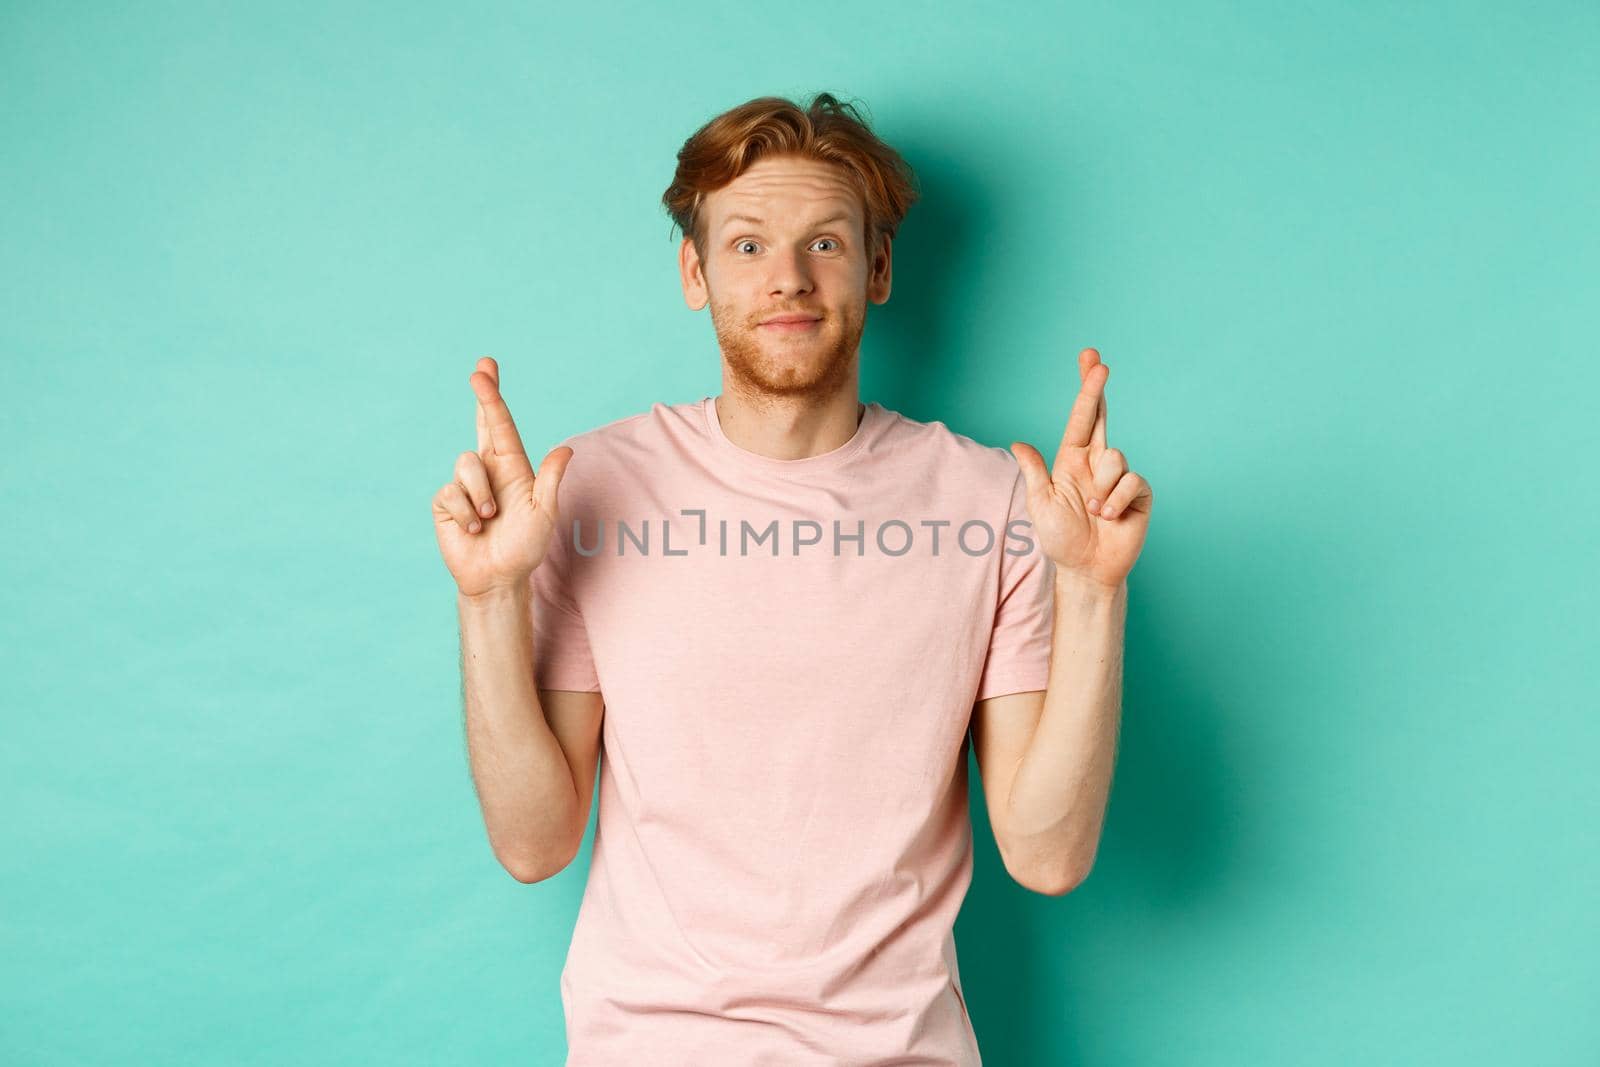 Smiling hopeful man with red hair making a wish, cross fingers for good luck and expecting something good, standing over turquoise background.